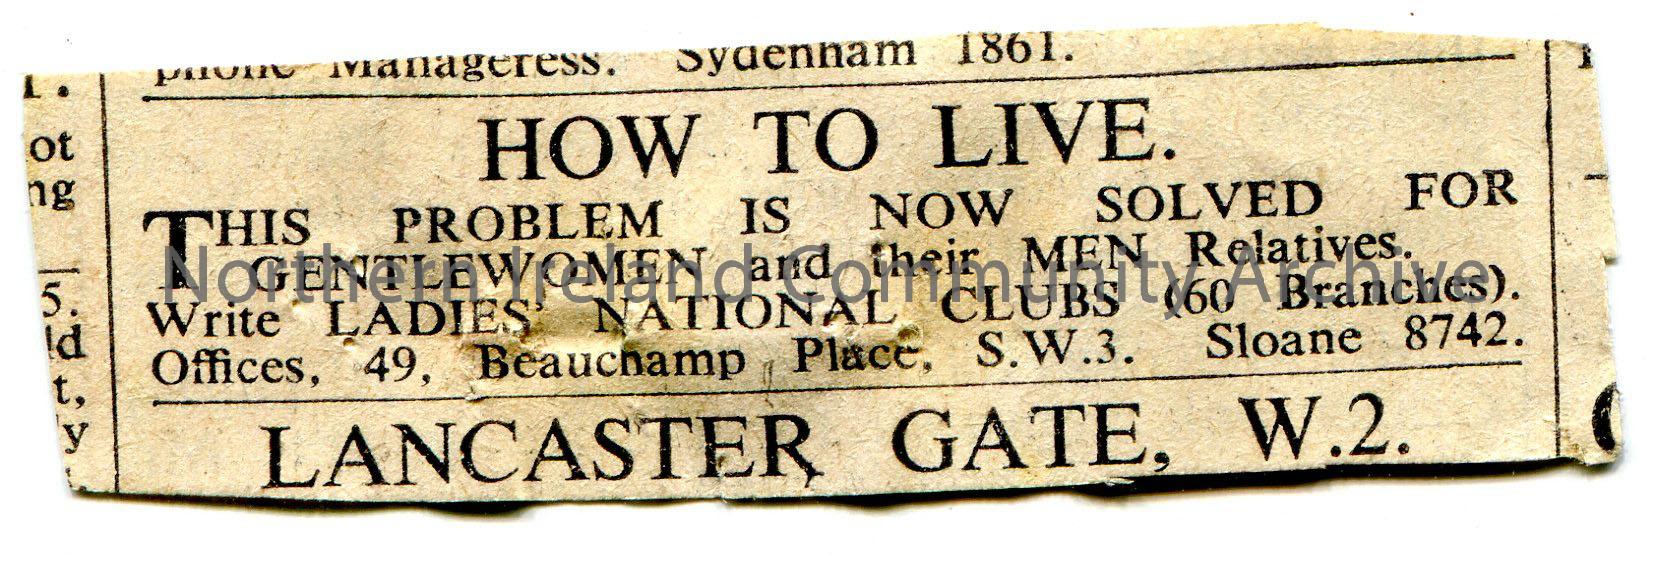 Advertisement cut out of newspaper re Ladies’ National Clubs titled ‘How To Live’. Offices at 49 Beauchamp Place, S.W.3.